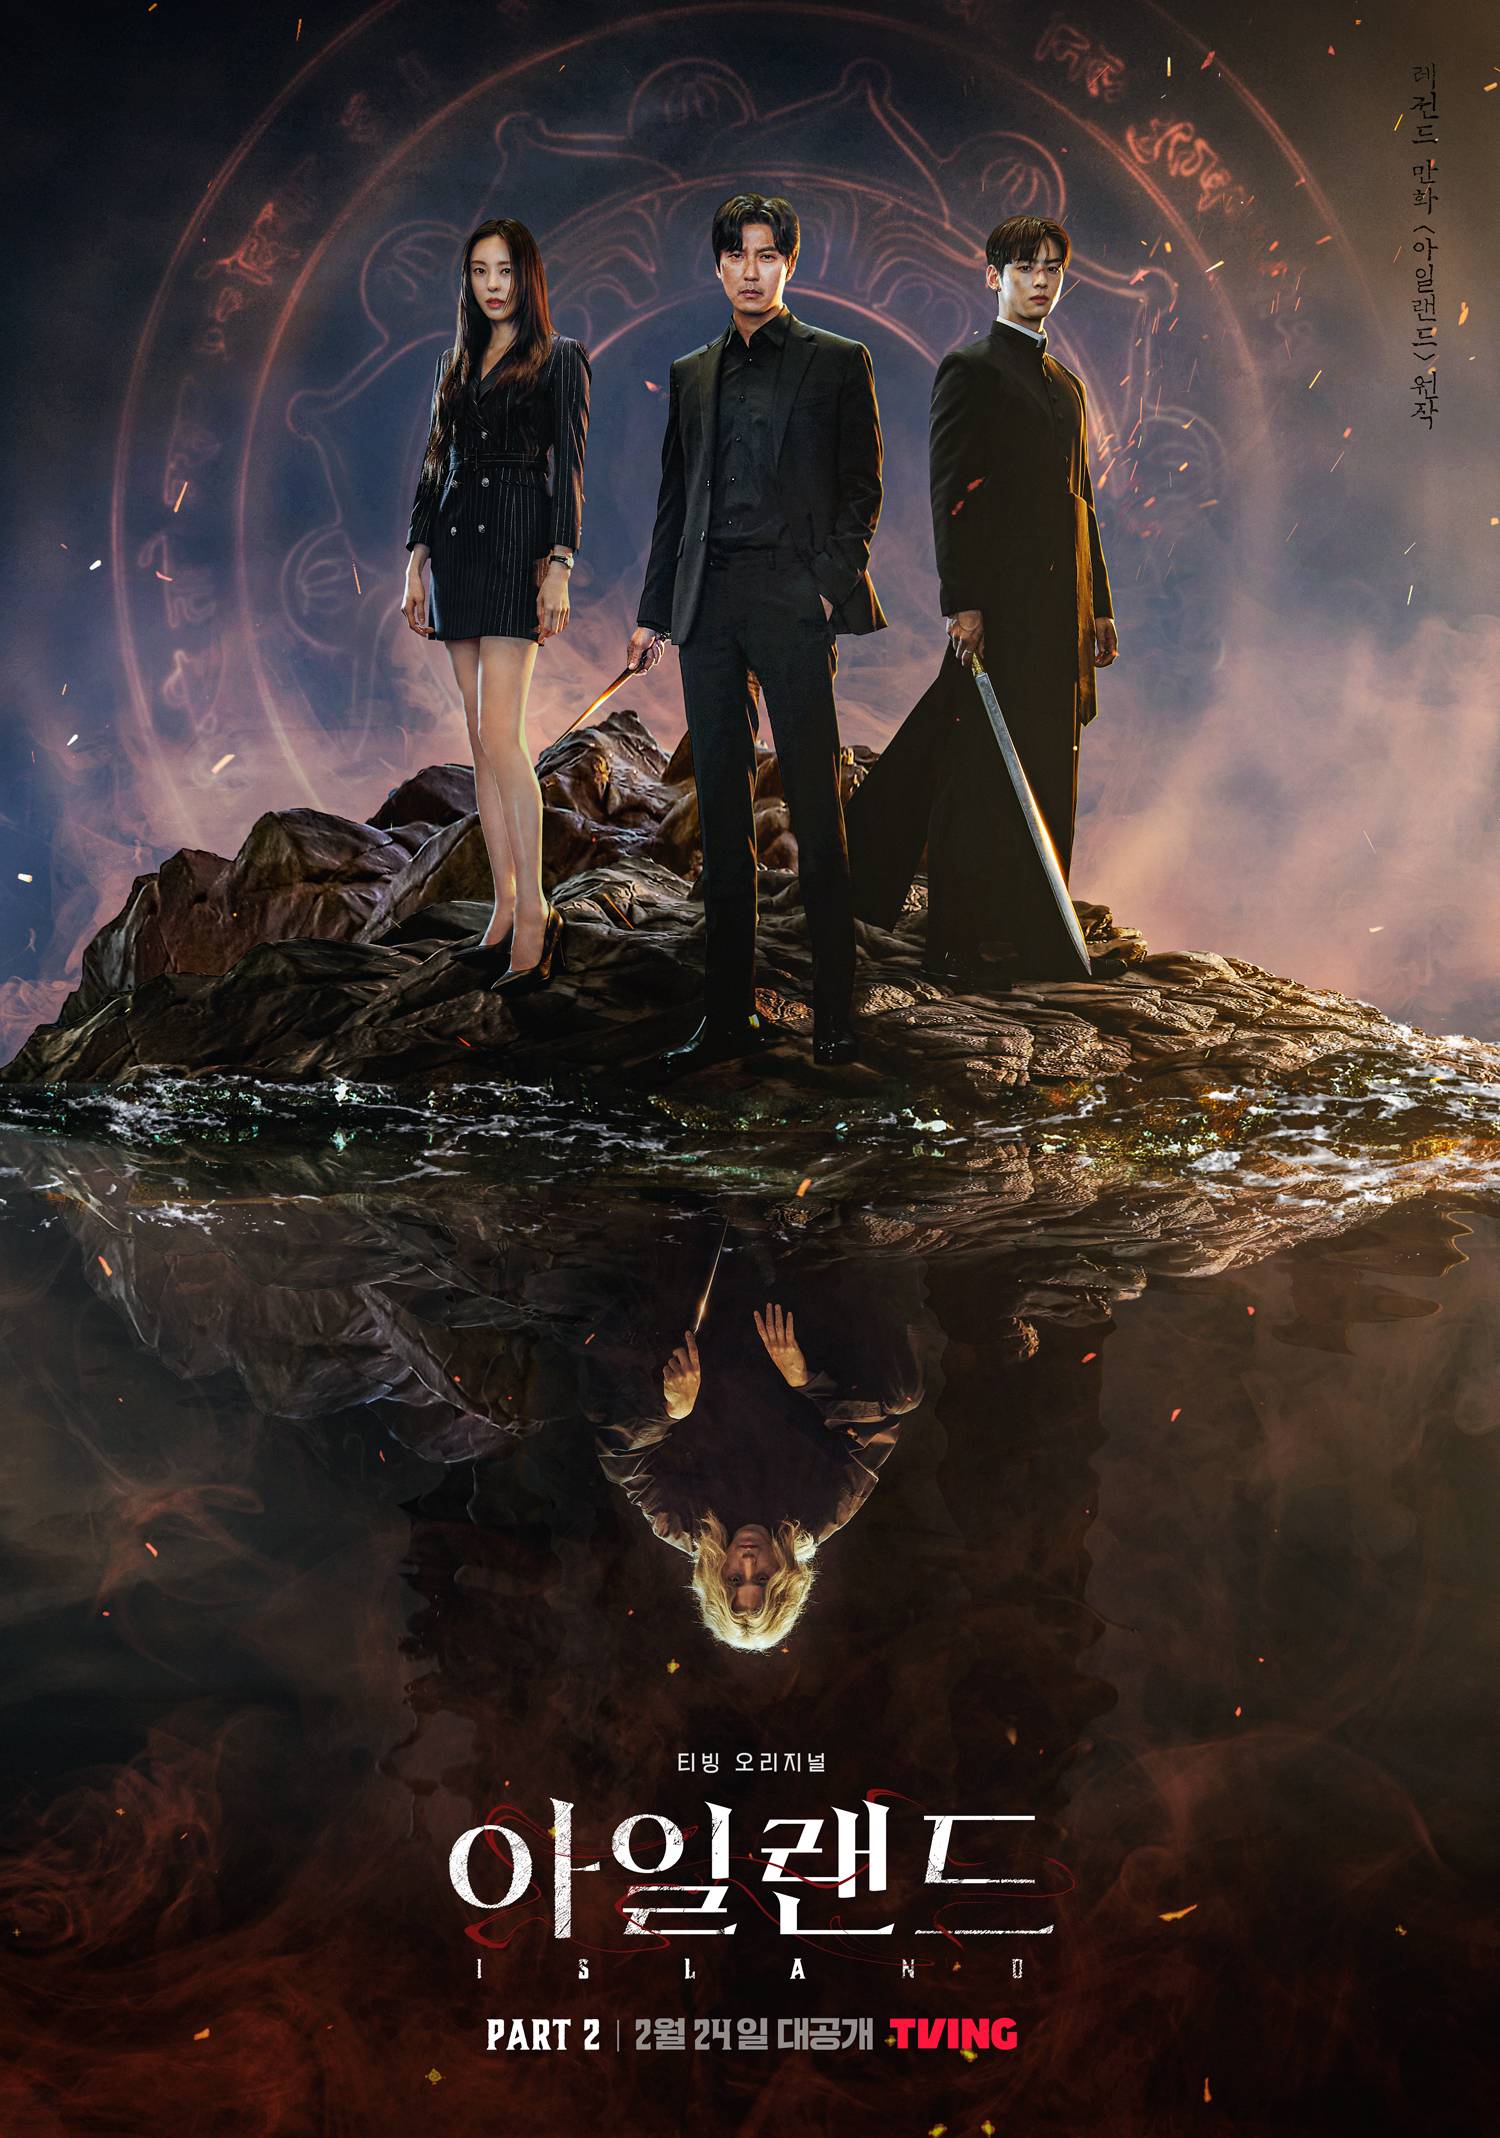 Island immerses viewers in a world of fantasy and action, following the journey of Won Mi-ho, a chaebol heiress ostracized from her family and rescued by an immortal demon hunter named Van. The young Catholic priest Yo-han is also intricately tied to Mi-ho's world, possessing supernatural exorcism skills.